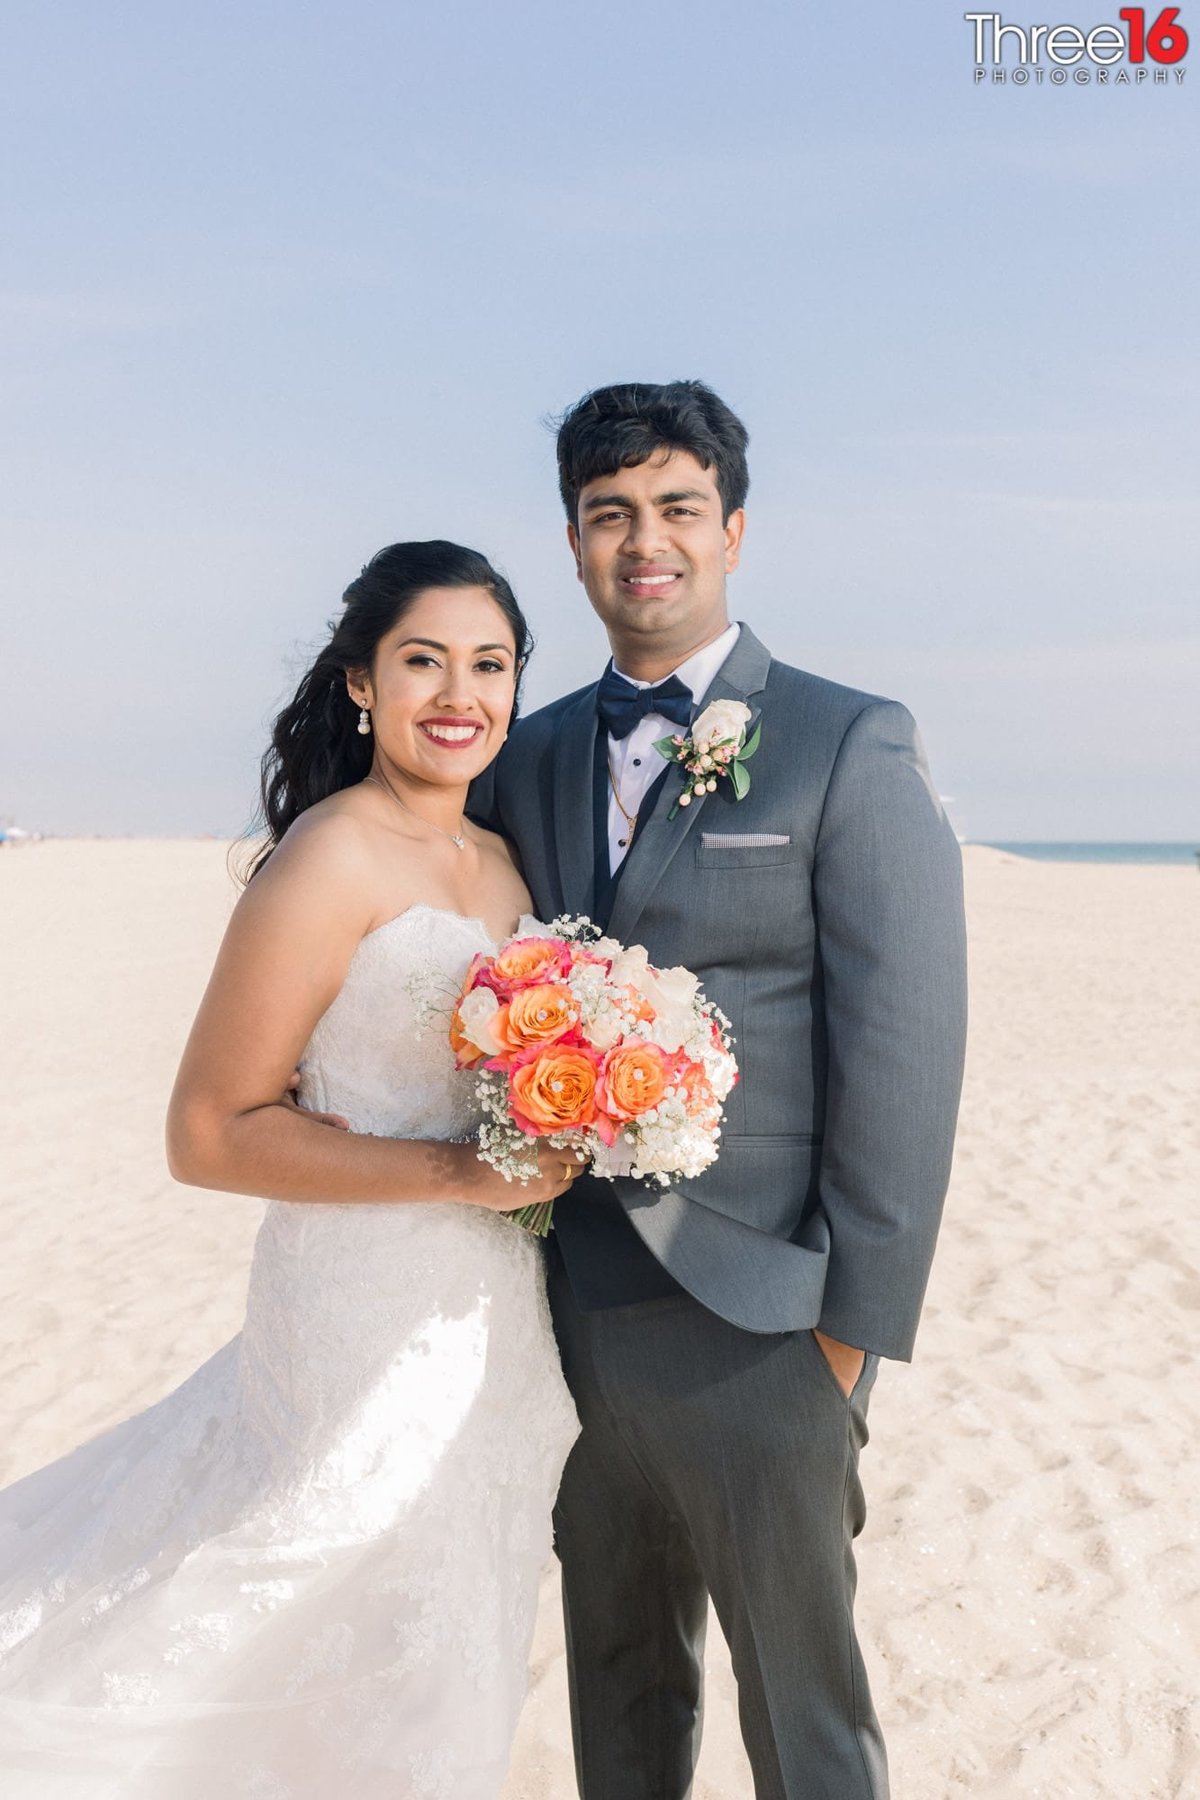 Bride and Groom pose together on the beach in Huntington Beach